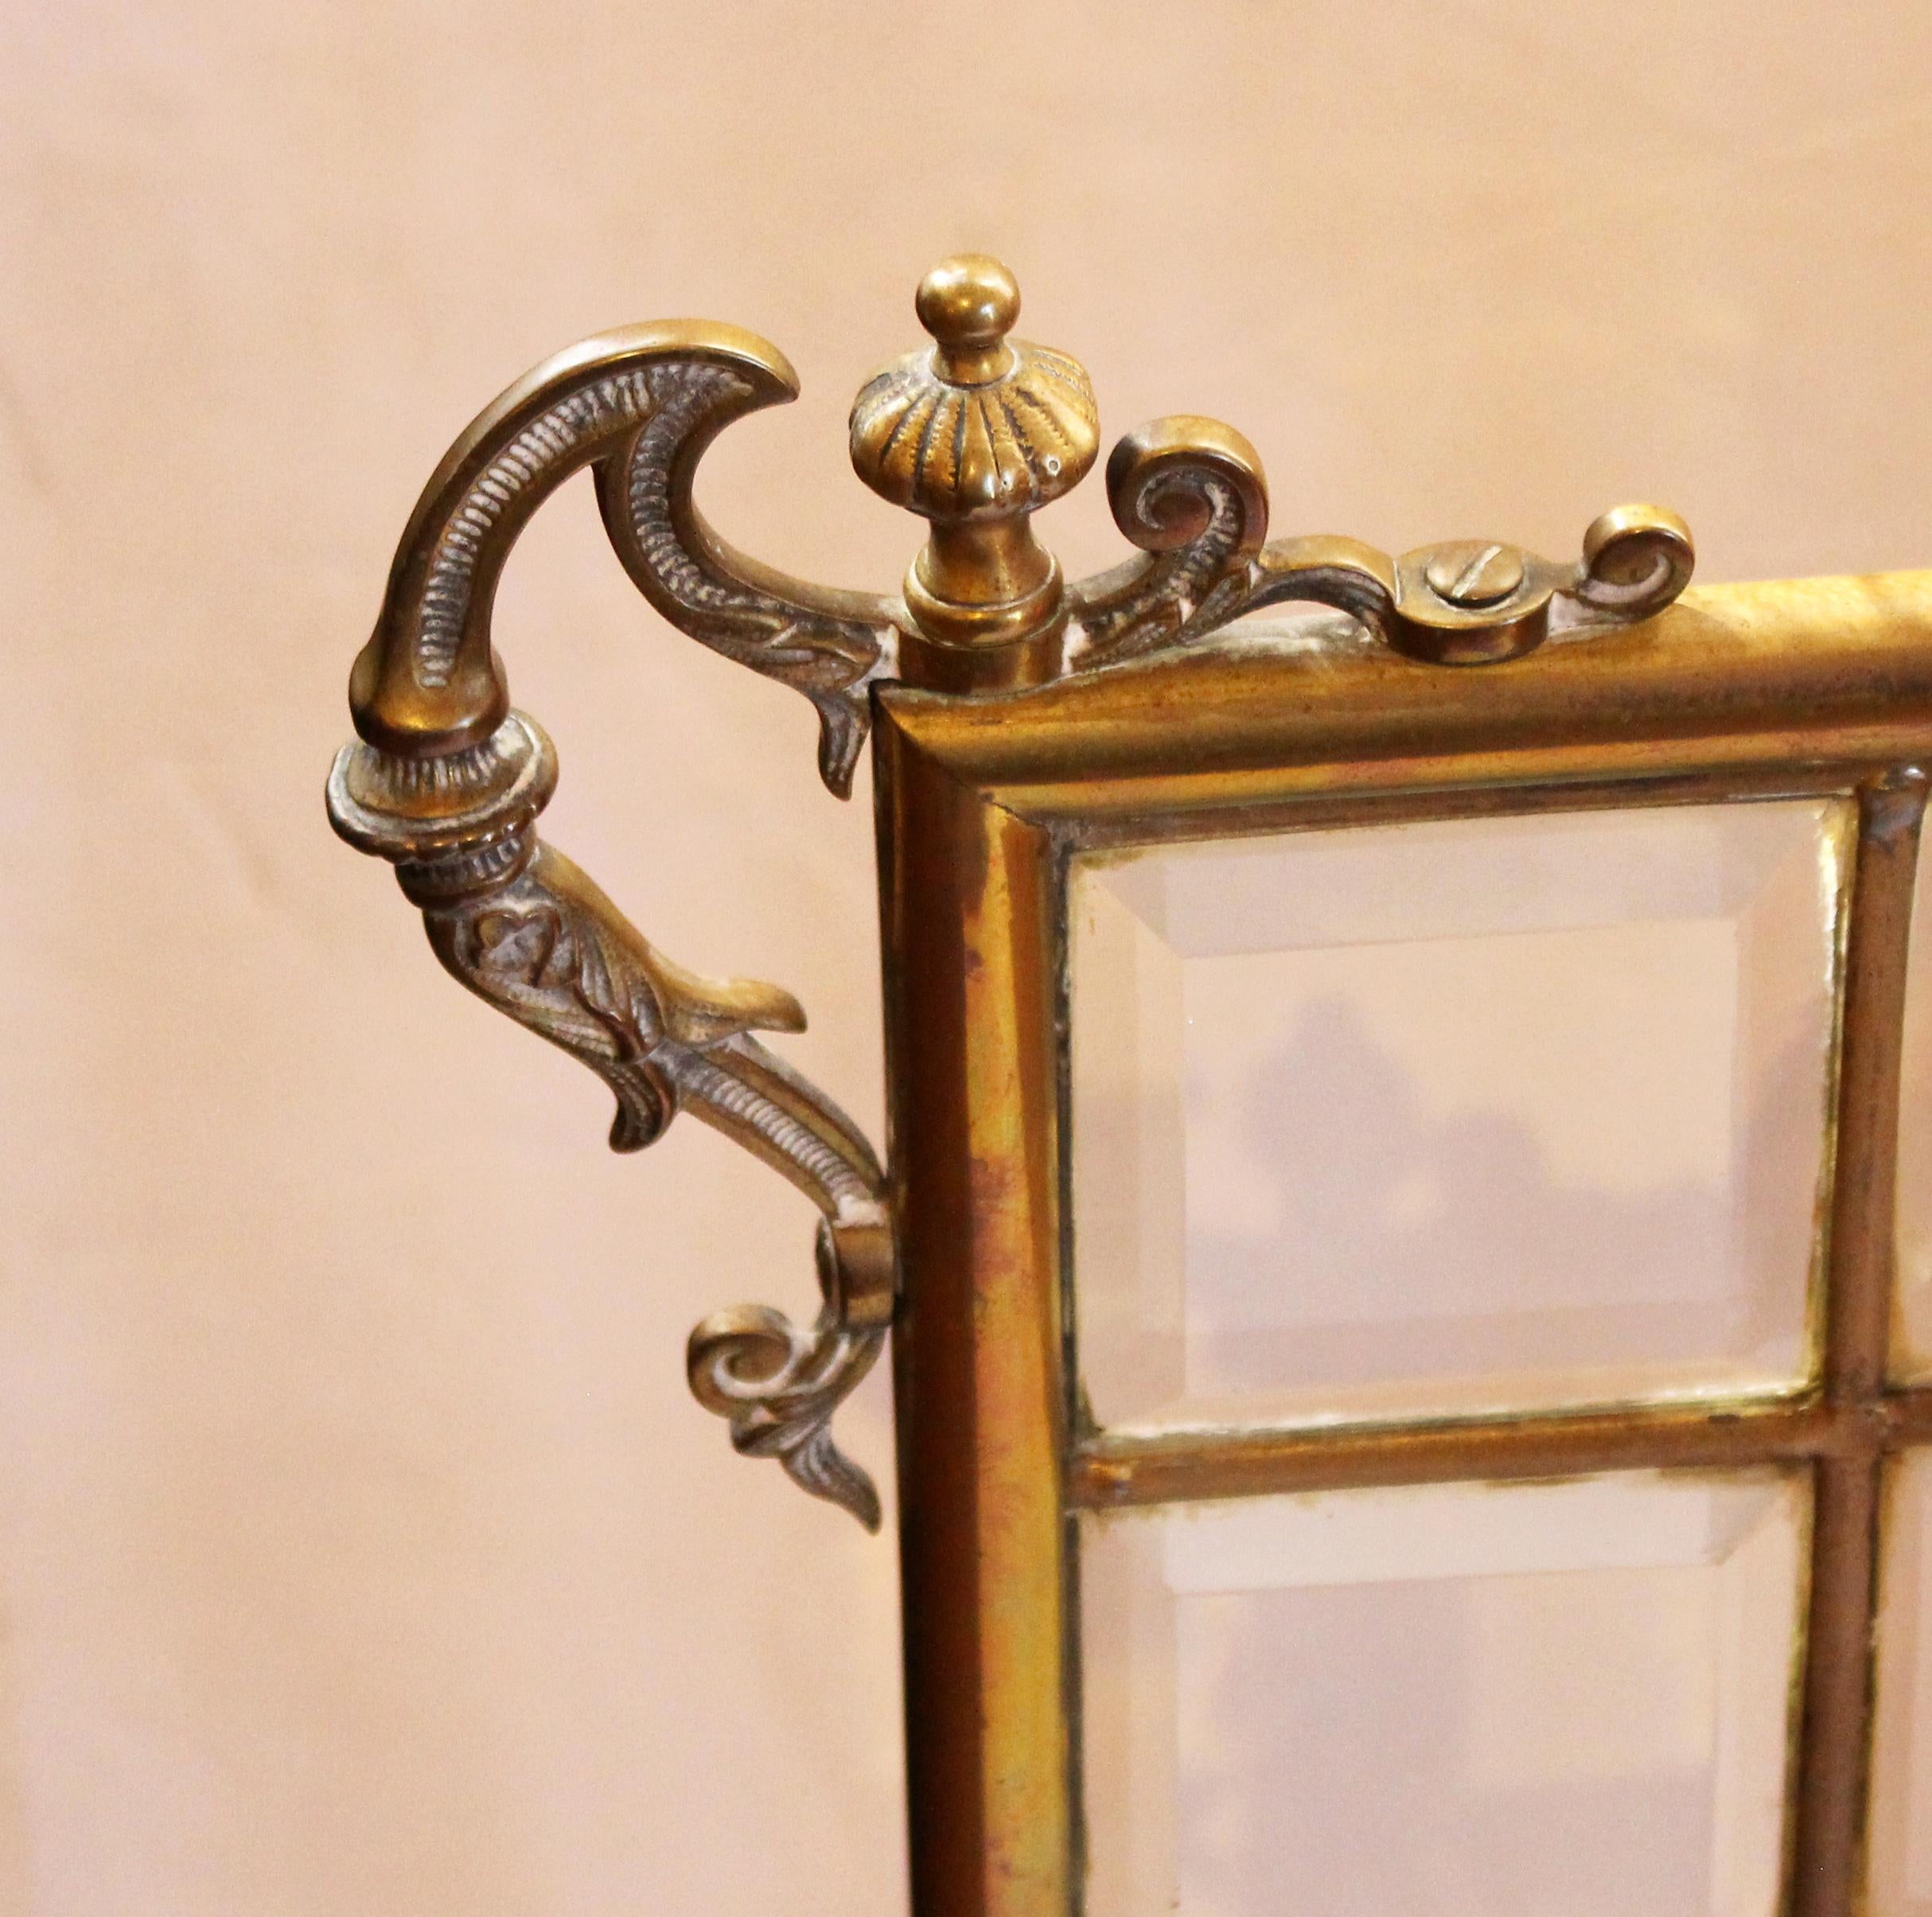 20th Century c. 1900 Beveled Glass & Brass Fireplace Screen For Sale